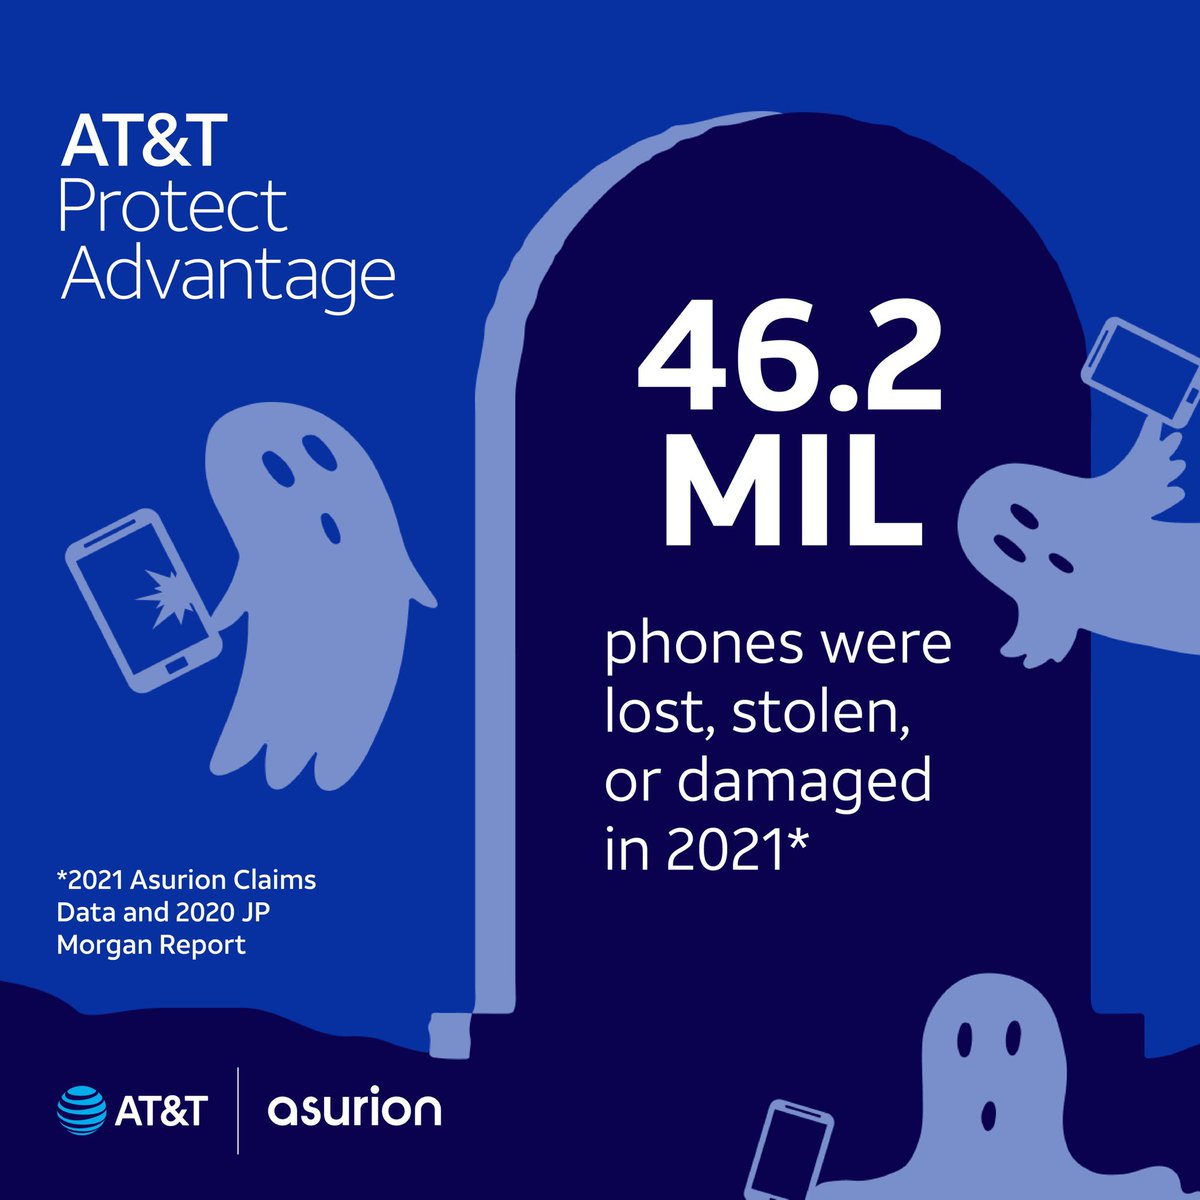 That’s a lot of ghosted phones 👻 📱. Good thing #ProtectAdvantage comes with as soon as same day repairs and replacements! Offer it to every customer, every time. #OurNE #HappyHalloween #DontGoBrackenMyPhone